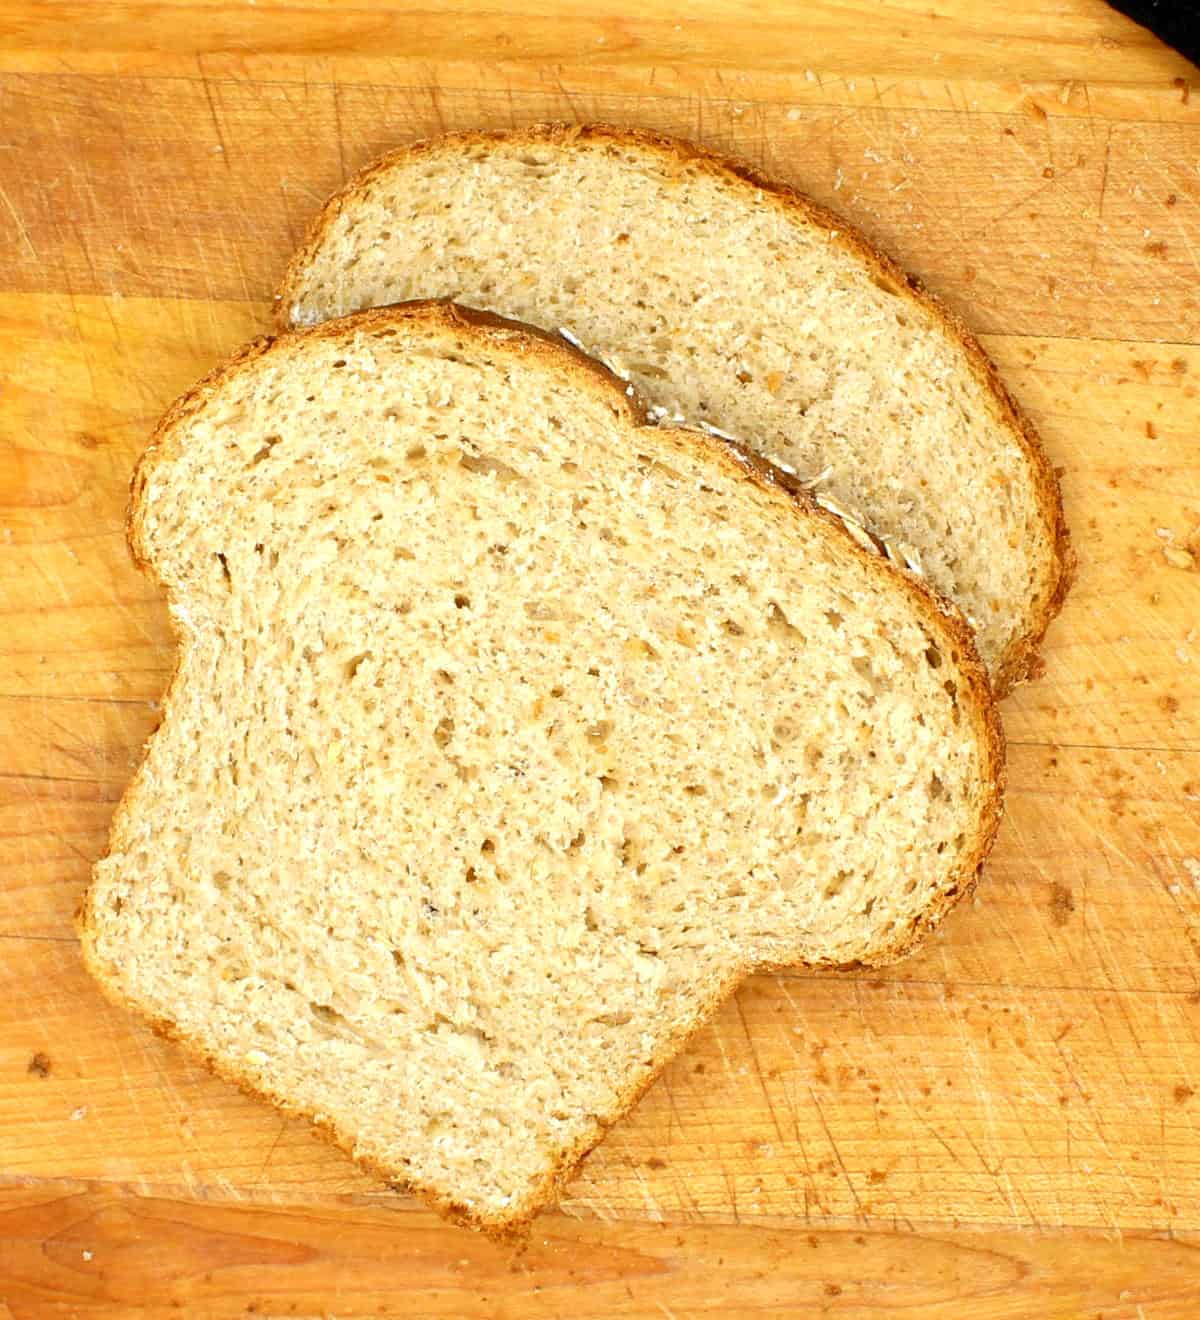 Slices of oatmeal bread on chopping board.